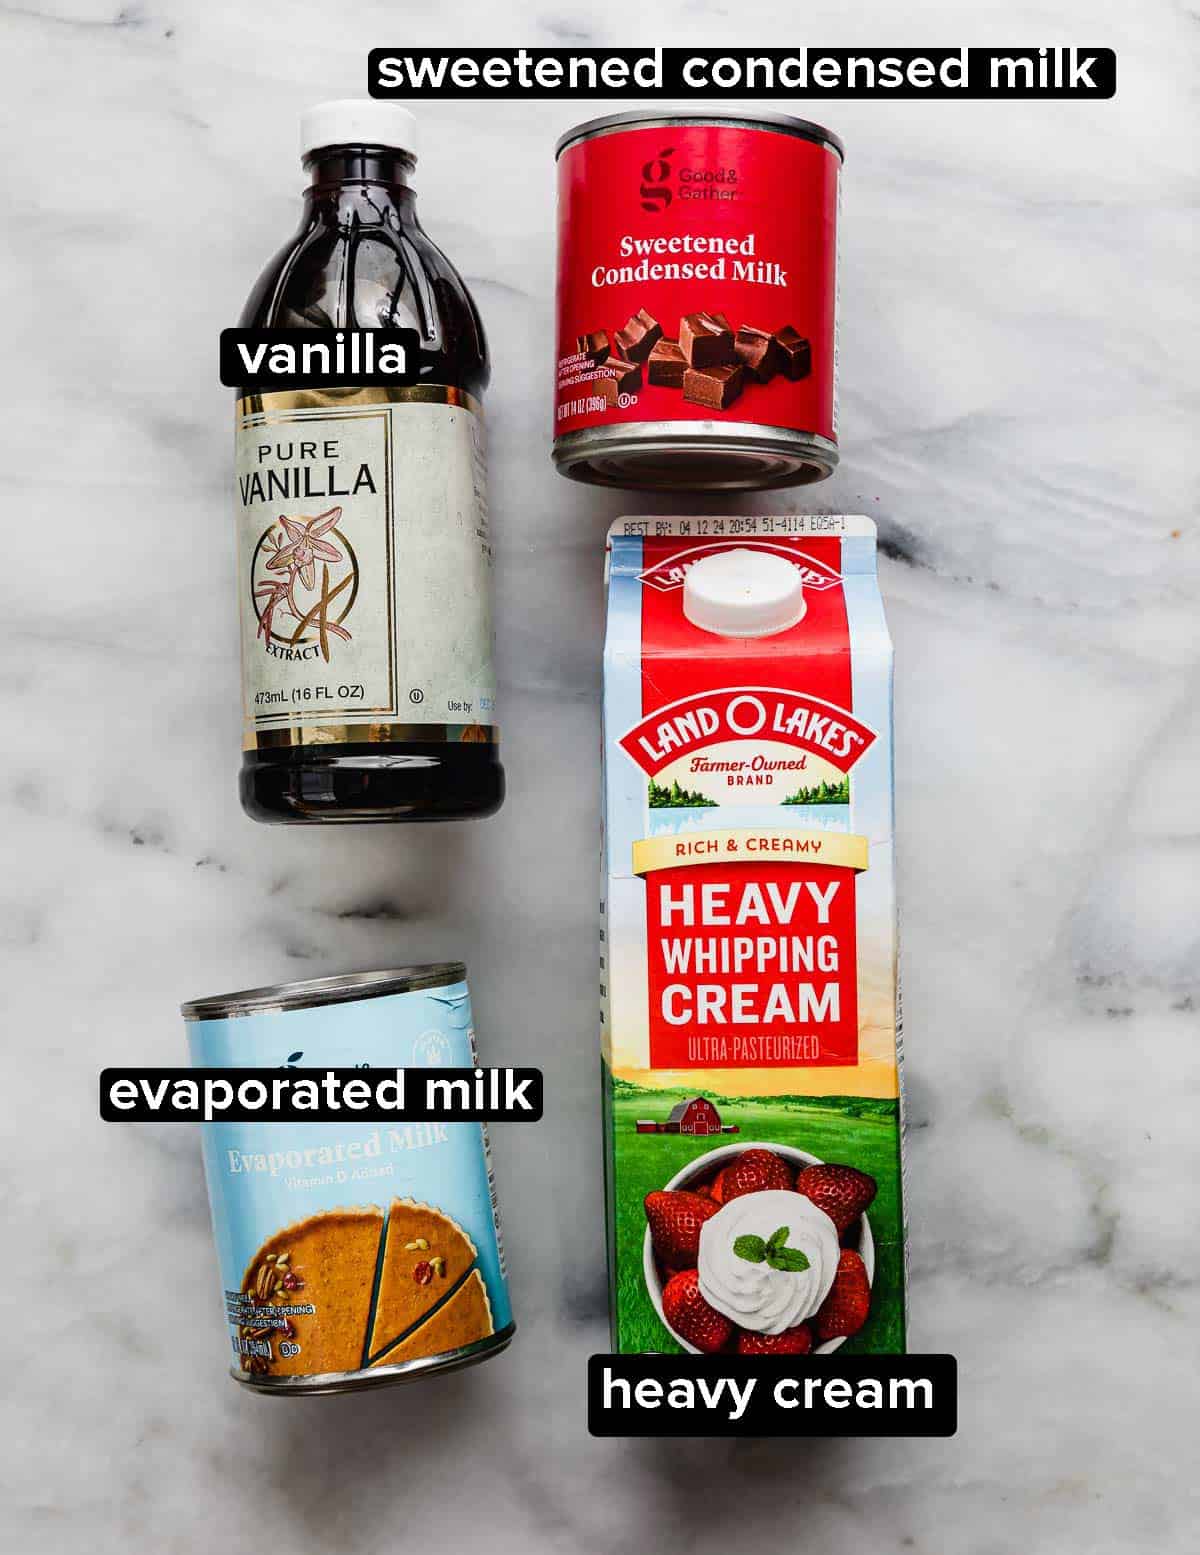 Three milks (evaporated milk, sweetened condensed milk, and heavy cream) paired with a bottle of vanilla extract on a marble surface.